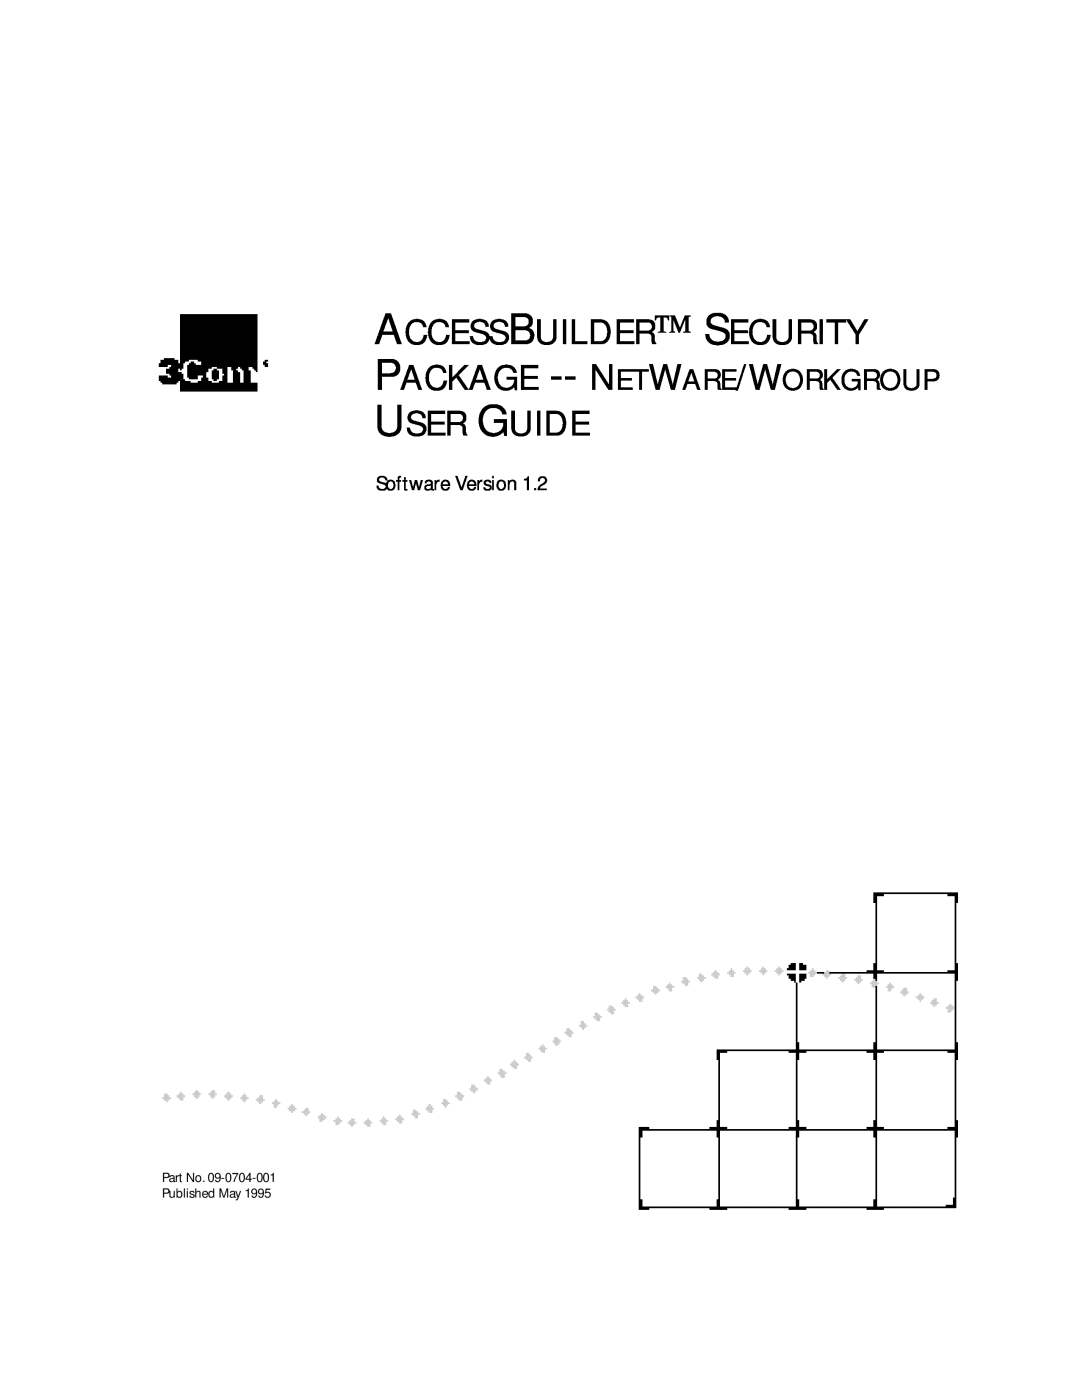 3Com 09-0704-001 manual Accessbuilder Security, User Guide, Package -- Netware/Workgroup 